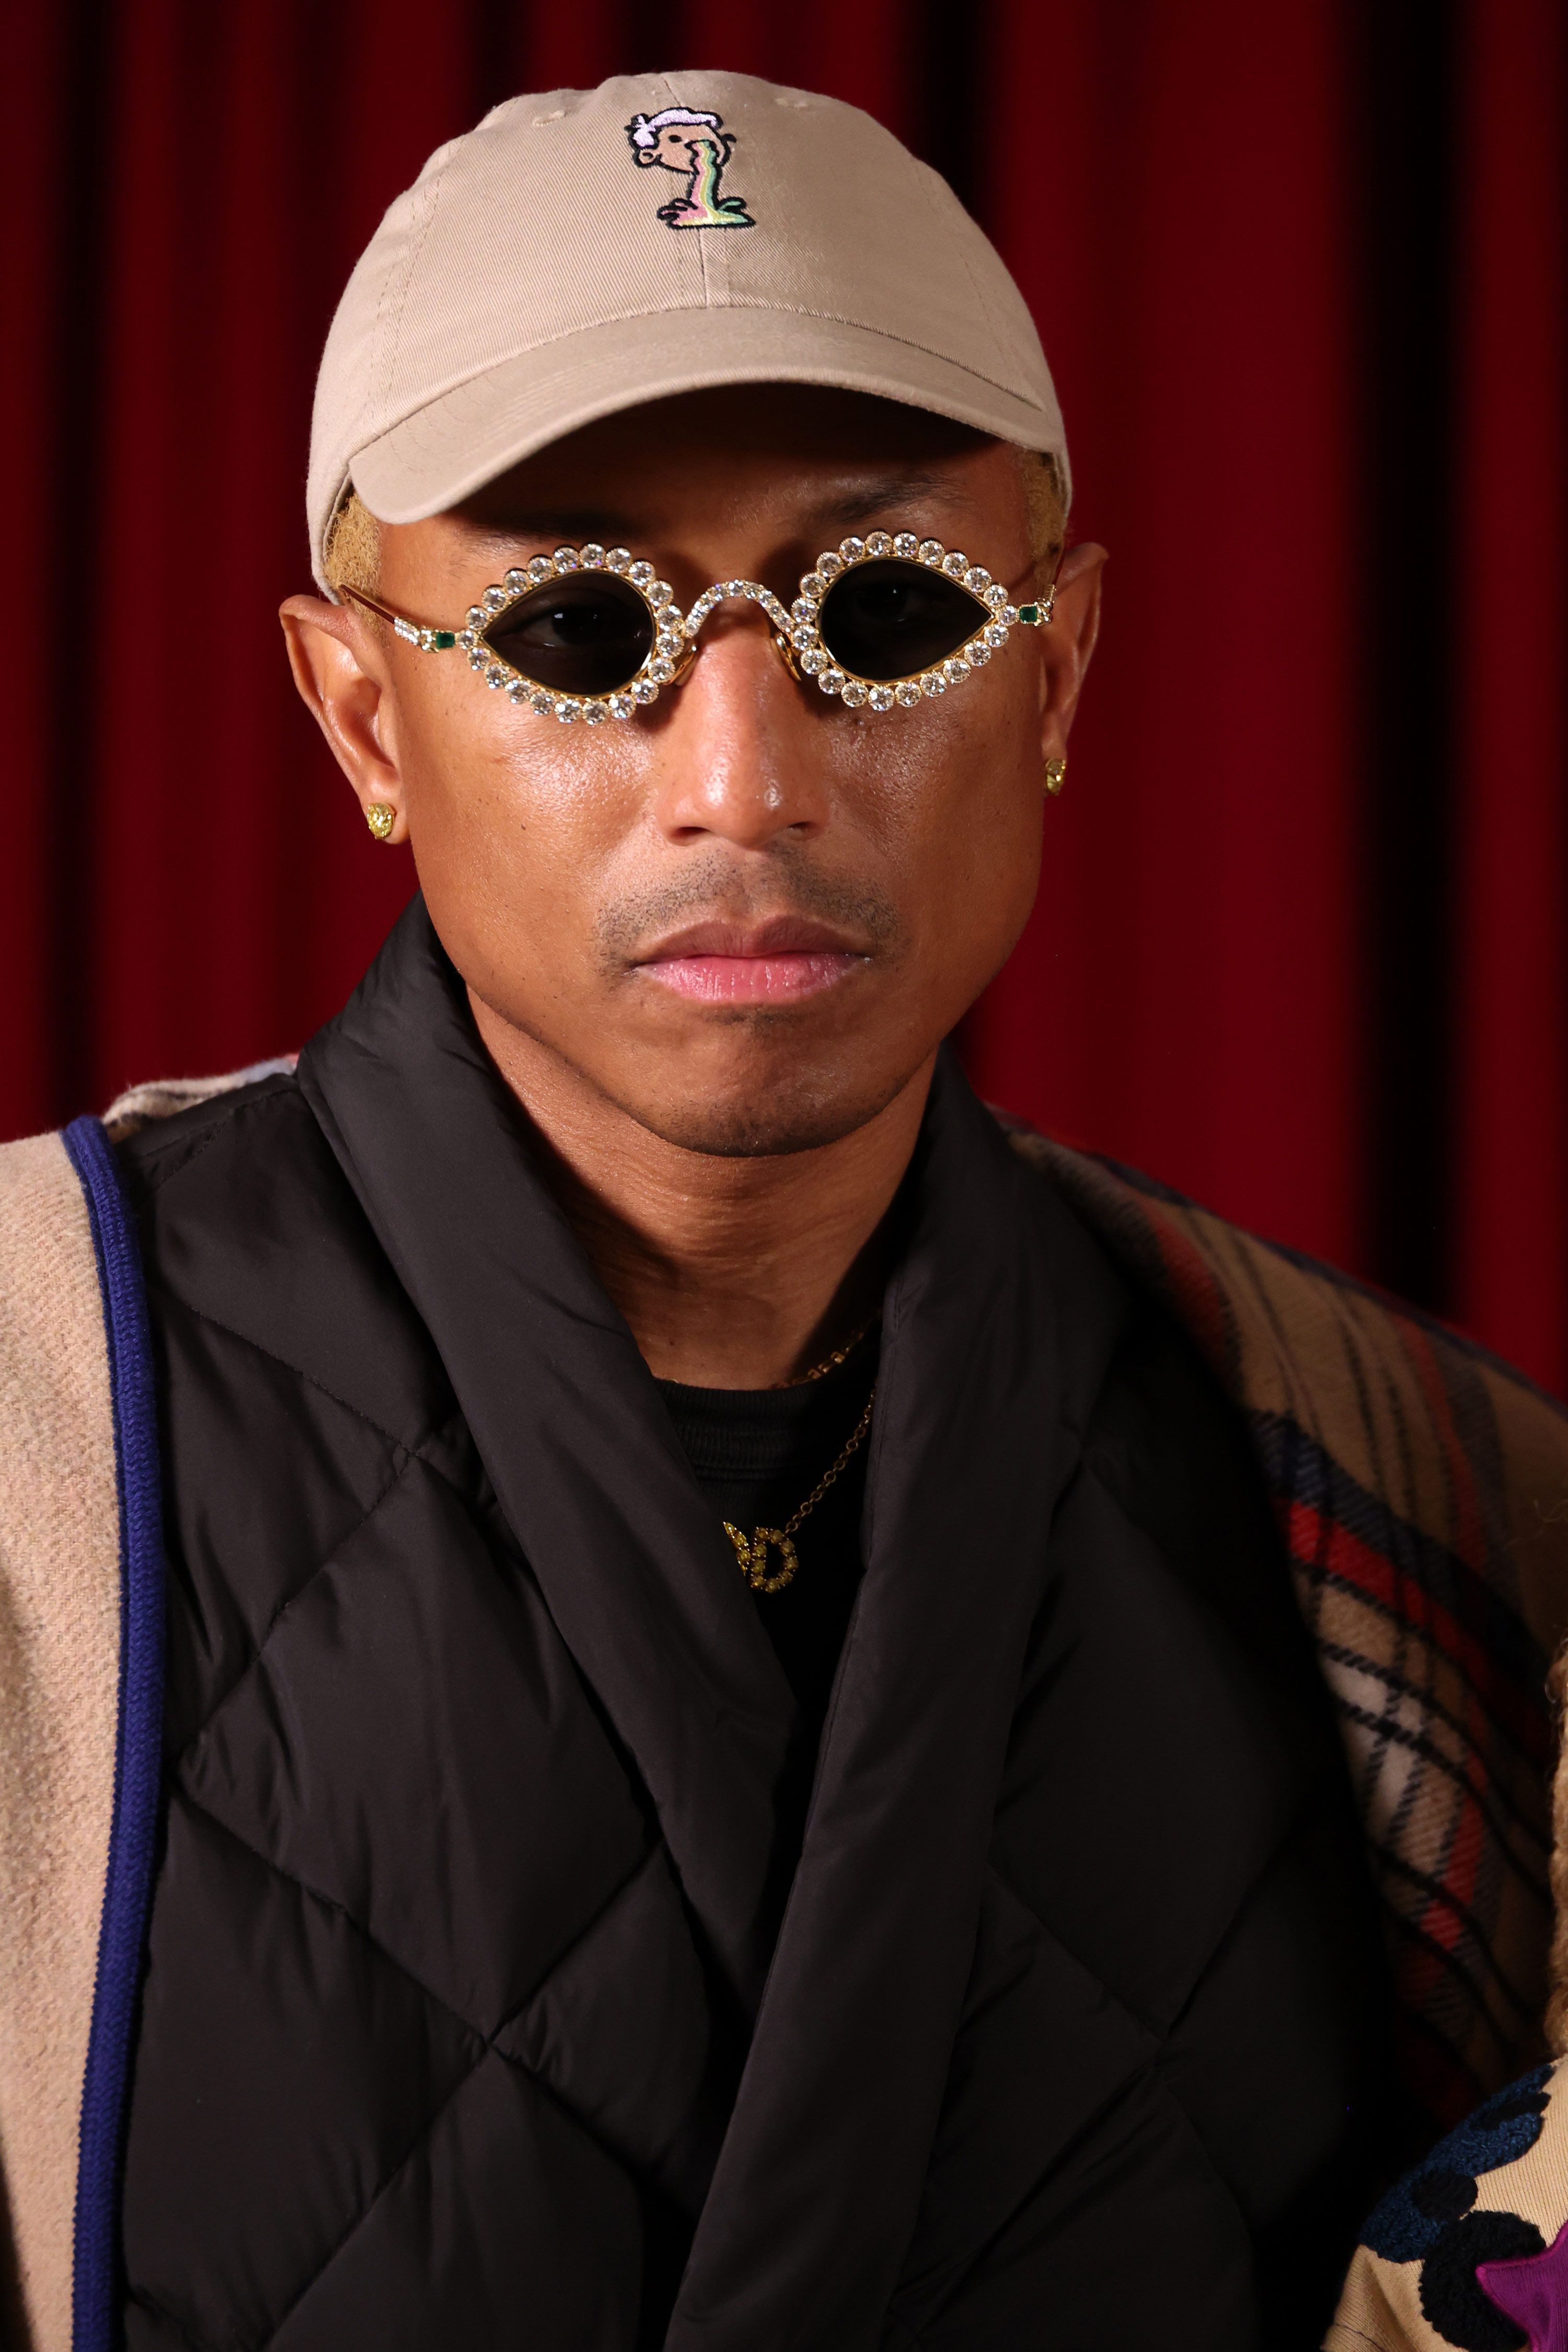 This Is Beyond Clothes”: Pharrell Williams Makes His Louis Vuitton